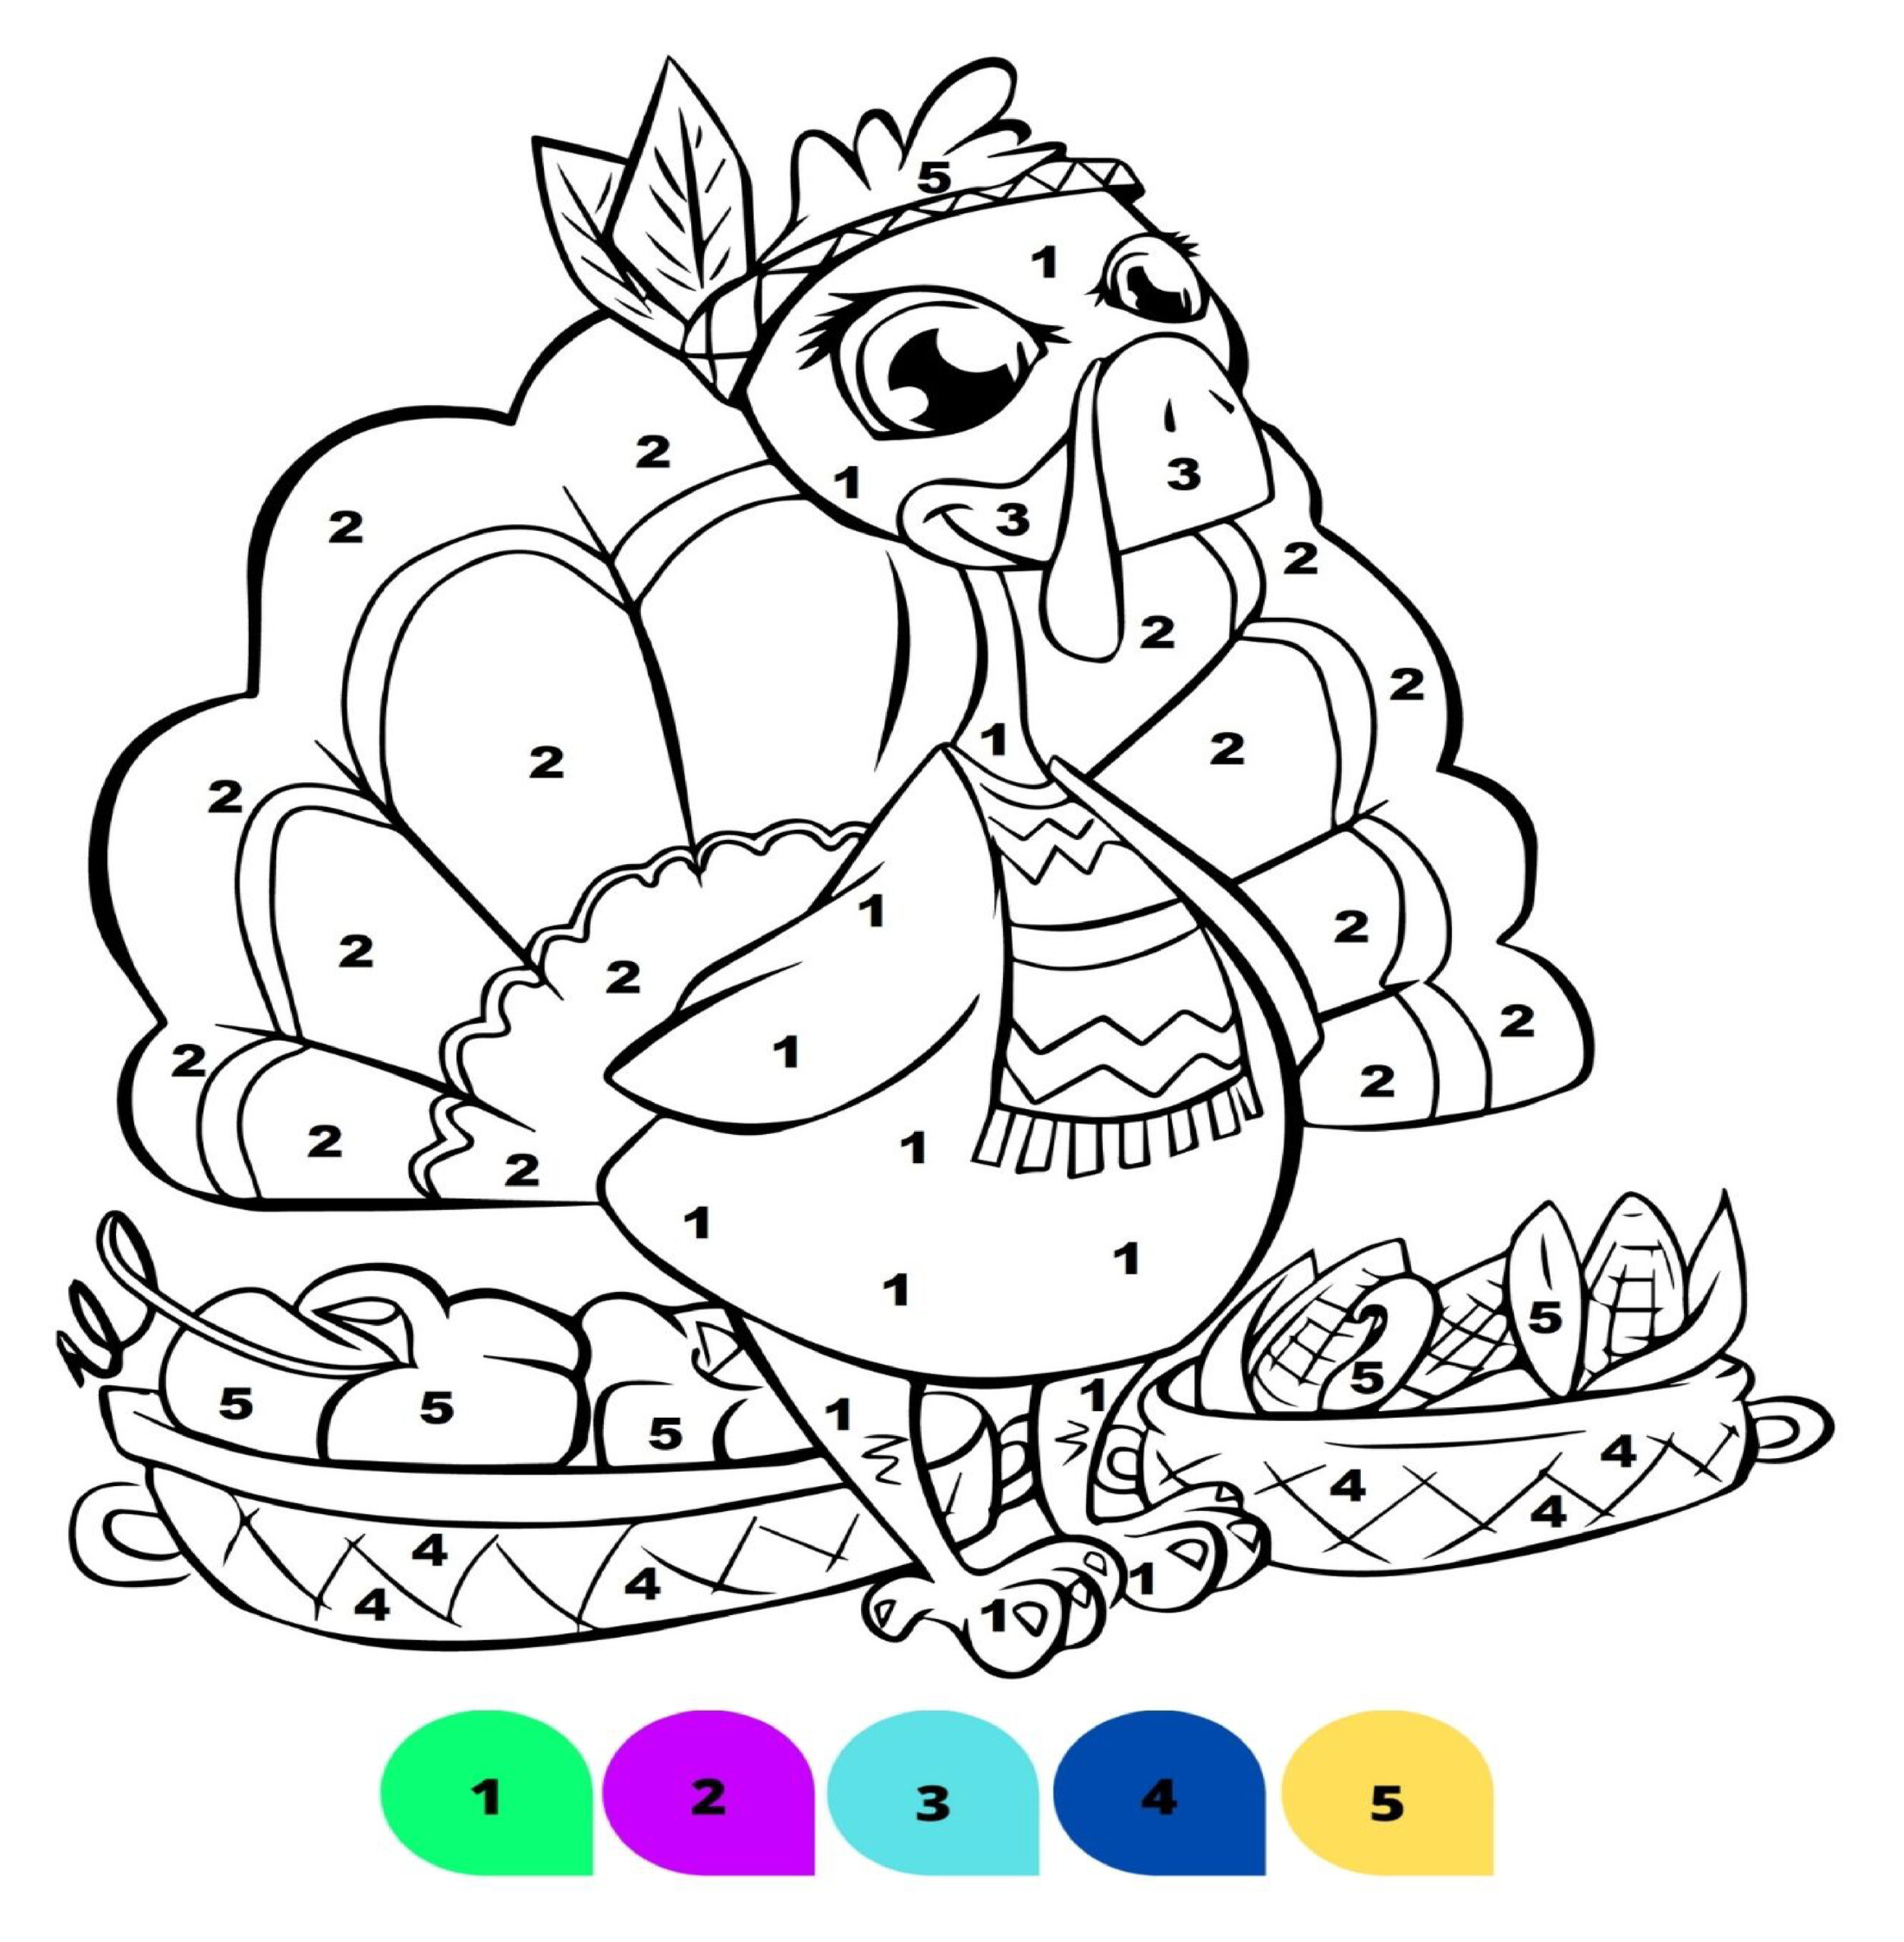 Thanksgiving color by number coloring book for kidsturkeys cornucopias autumn made by teachers